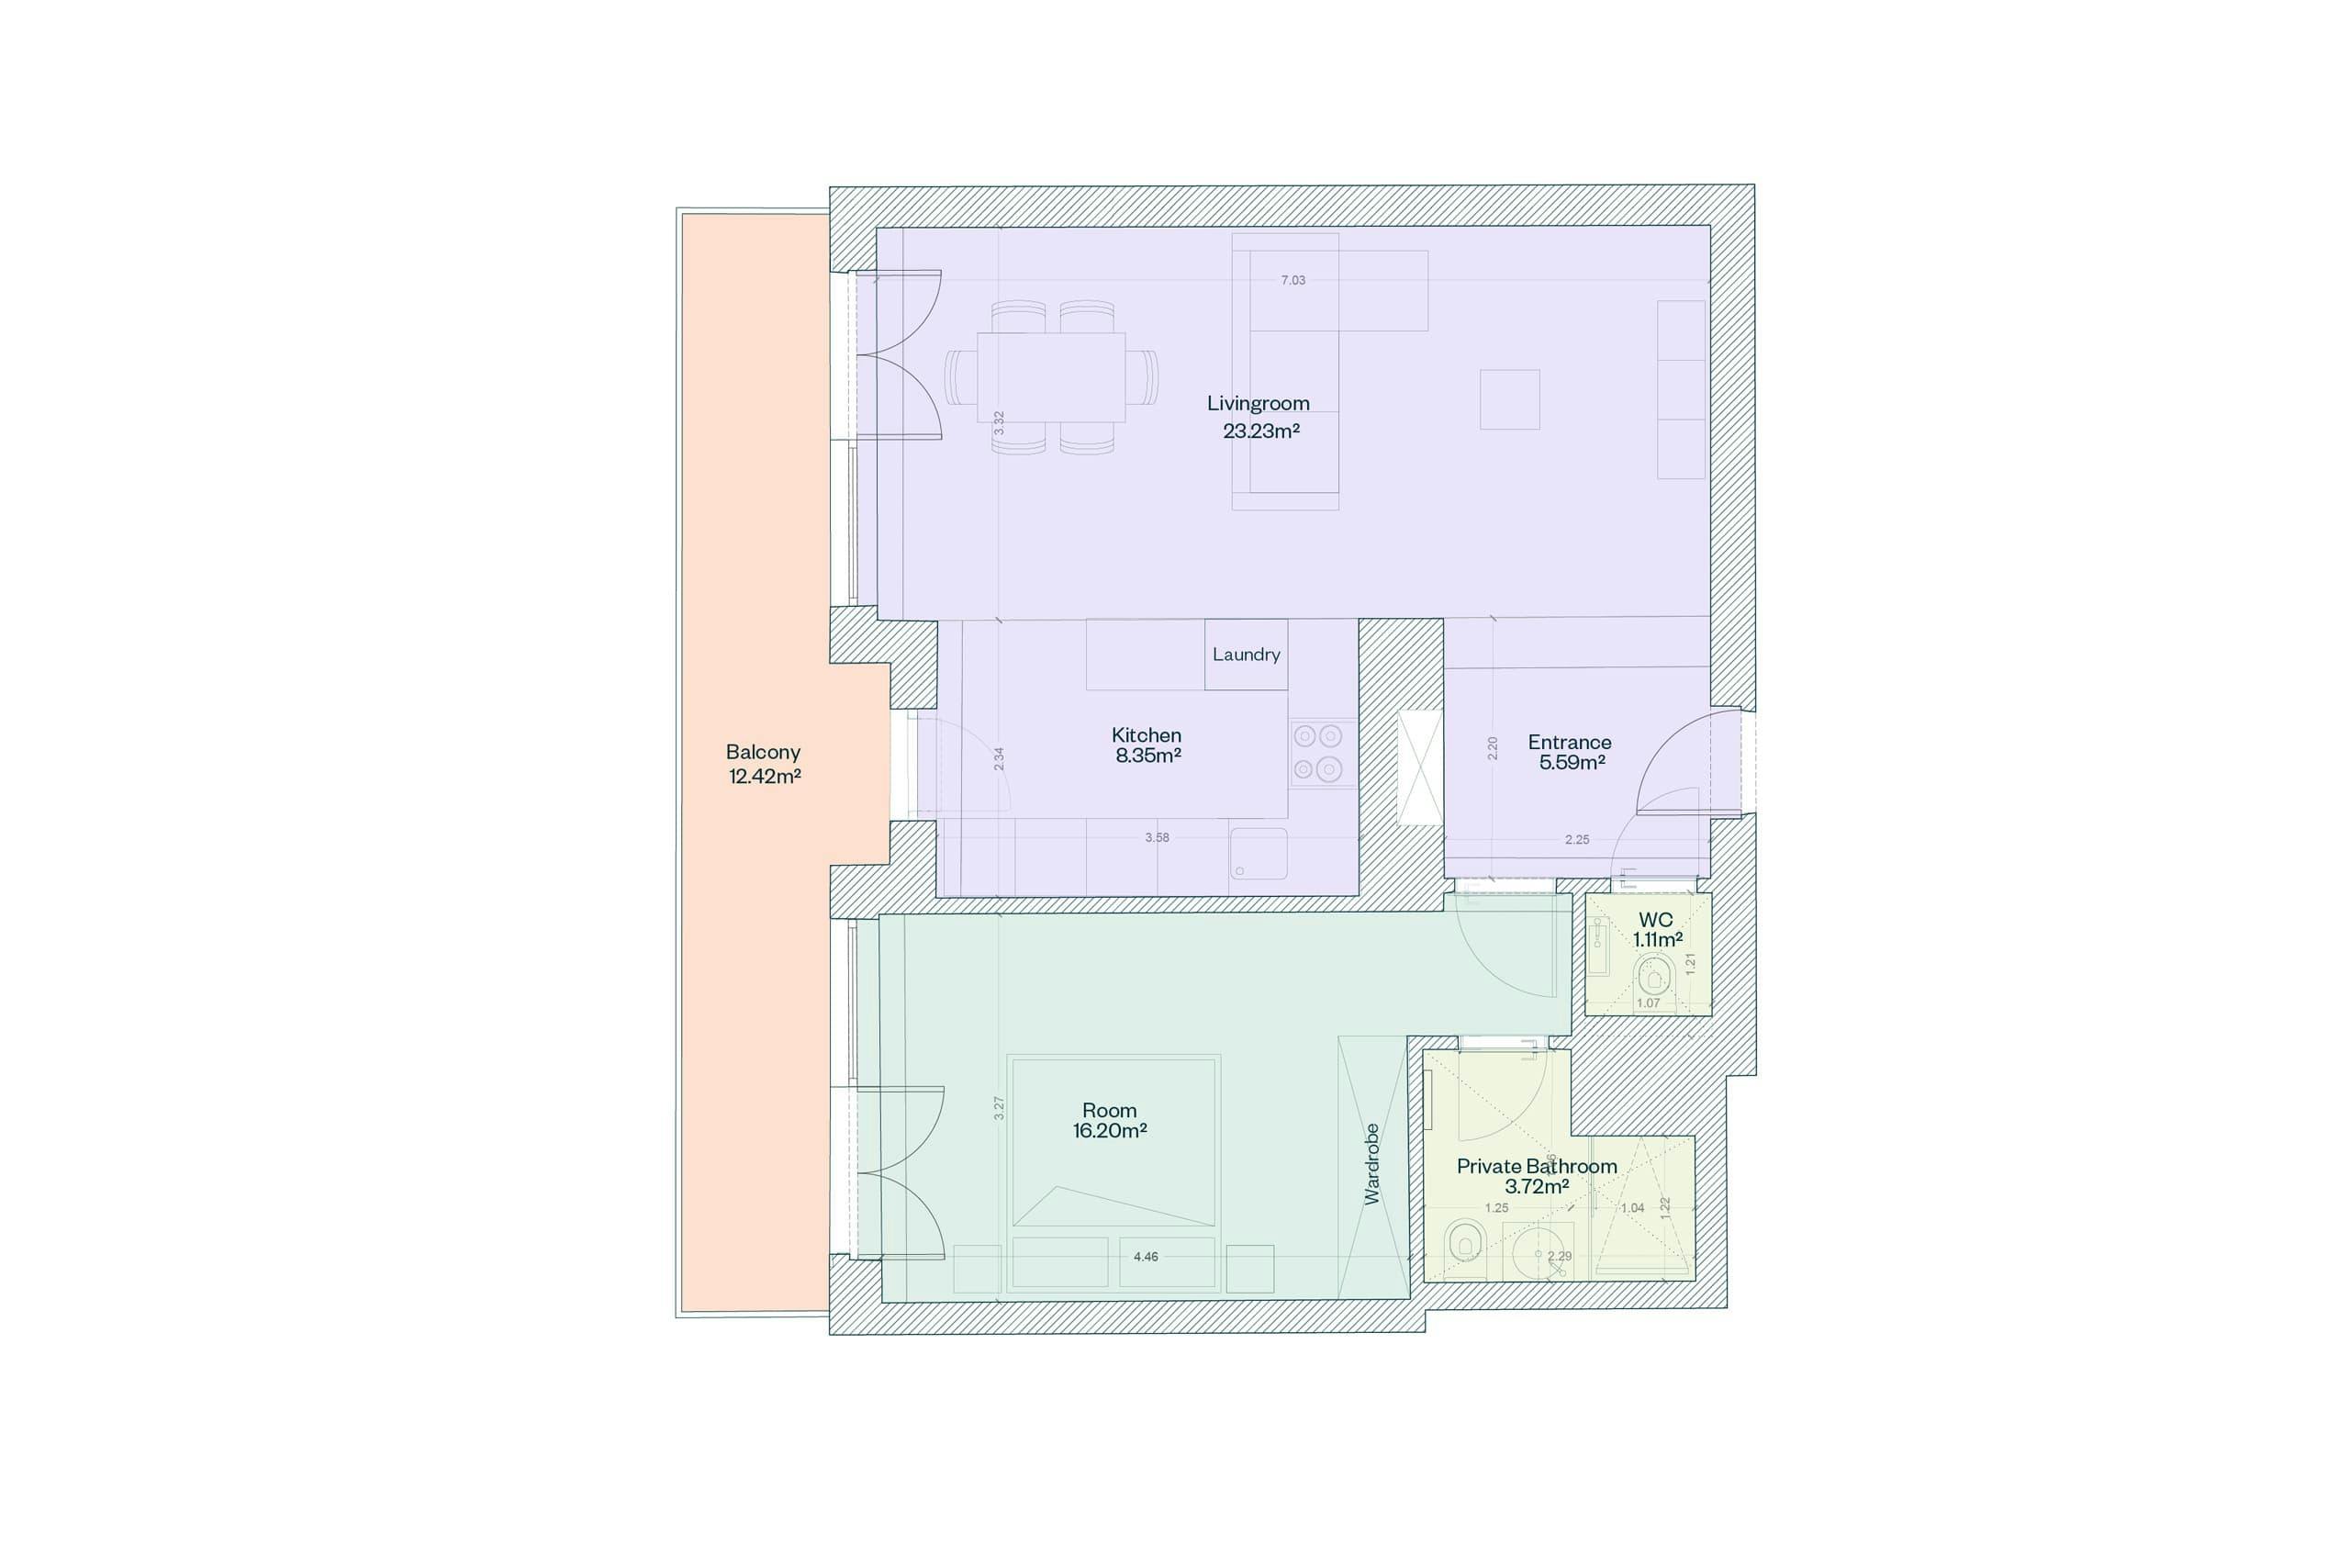 Visual guide floor plan for apartment Petrusse at Hamilius apartments in the centre of Luxembourg. The plan show the layout of the one bedroom apartment's living area, bedroom and bathroom and additional separate toilet.  It also shows a large full-length balcony that goes from the bedroom to living area.